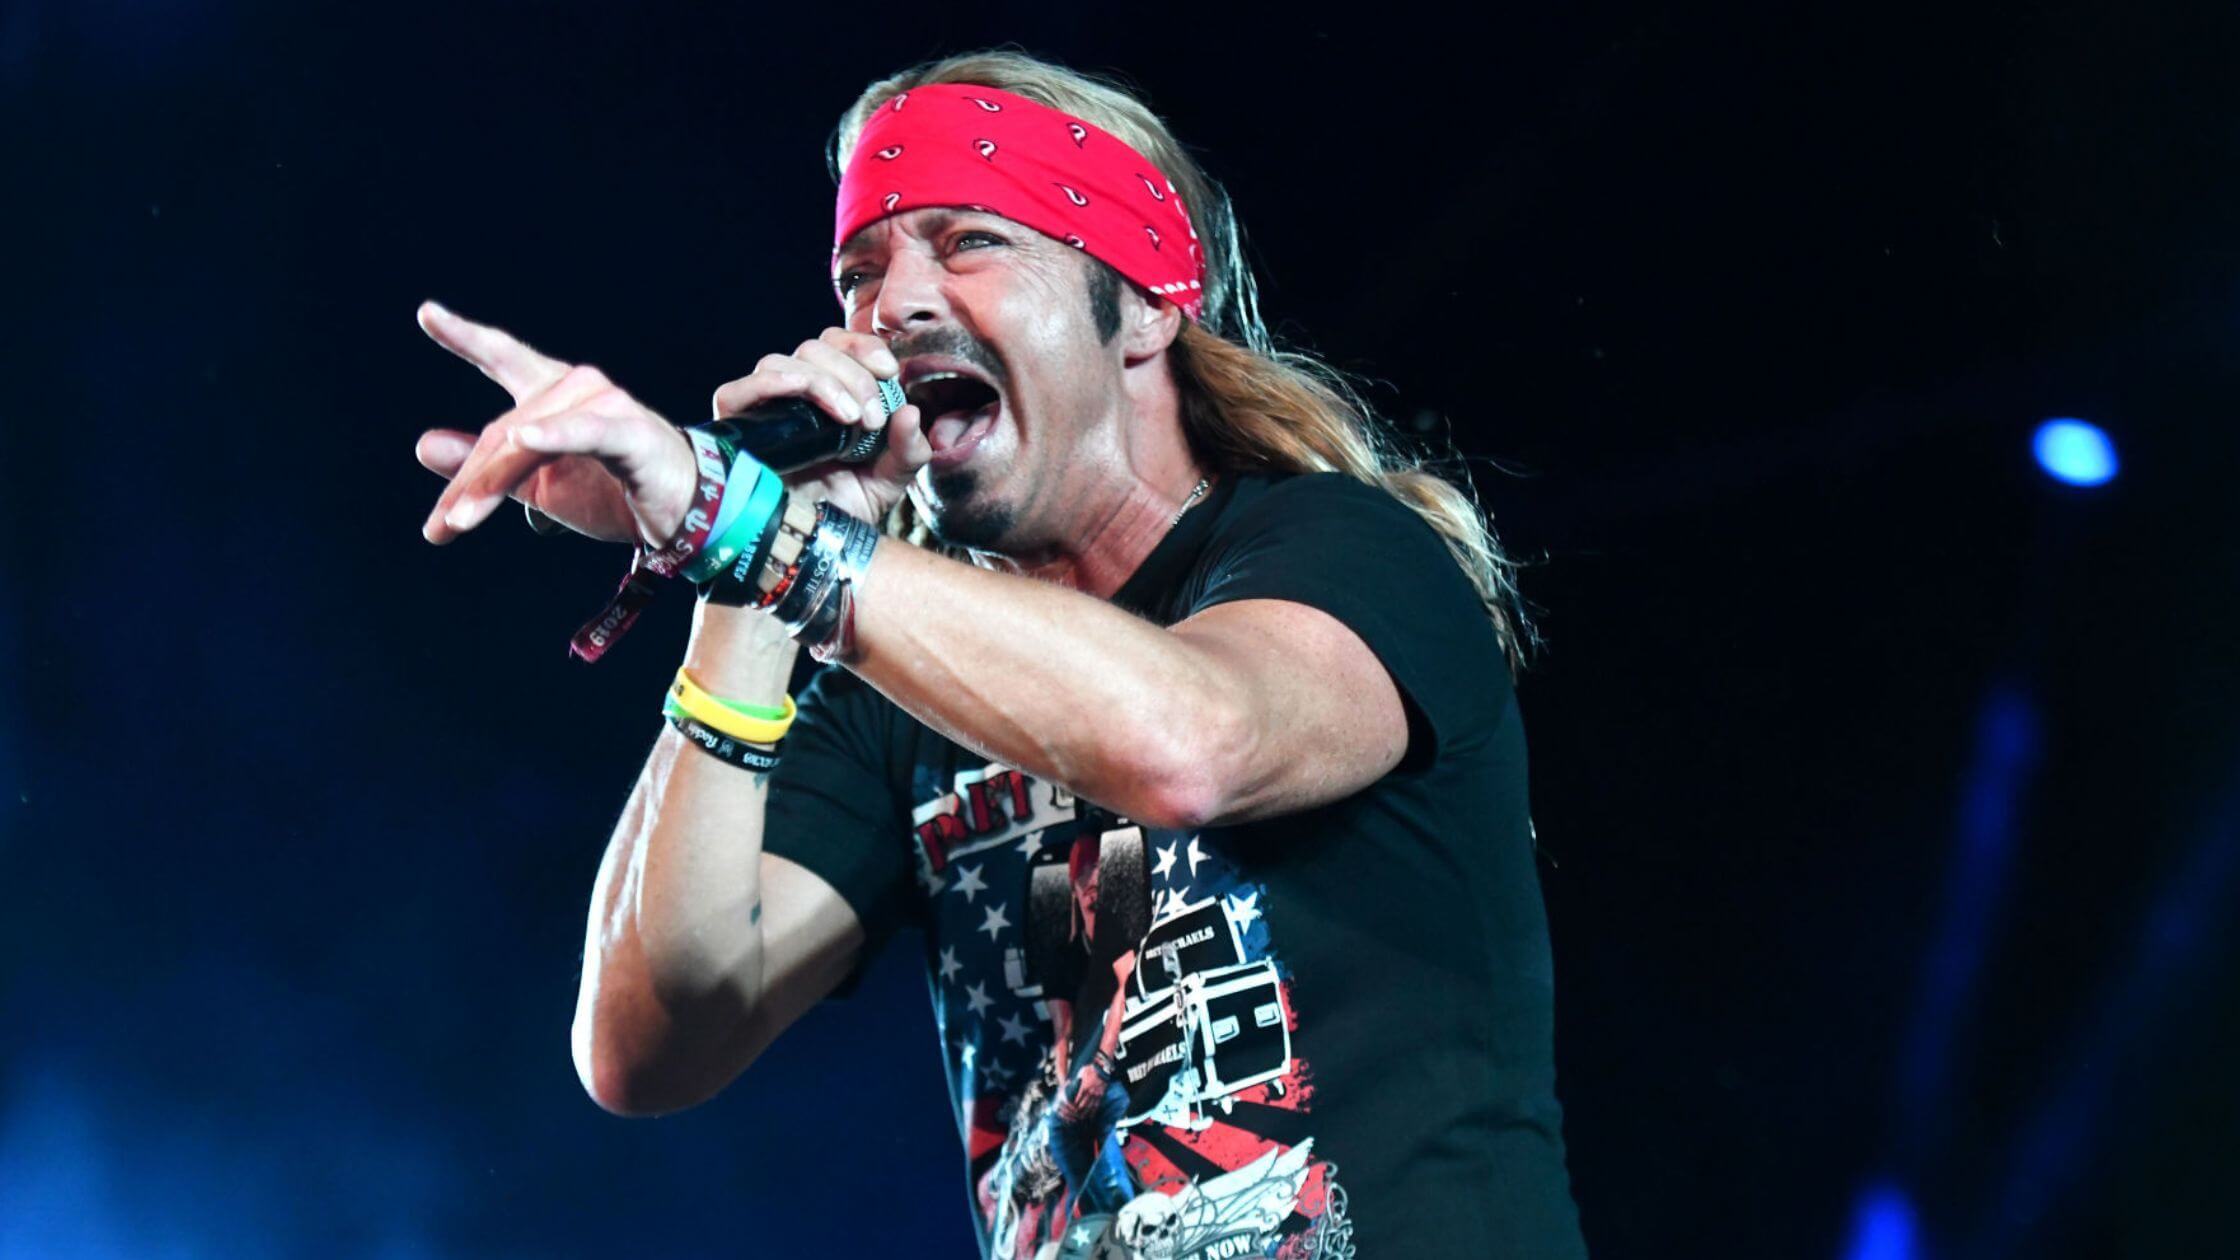 Bret Michaels Is In The Hospital, So Poison's Show In Nashville Is Canceled!!